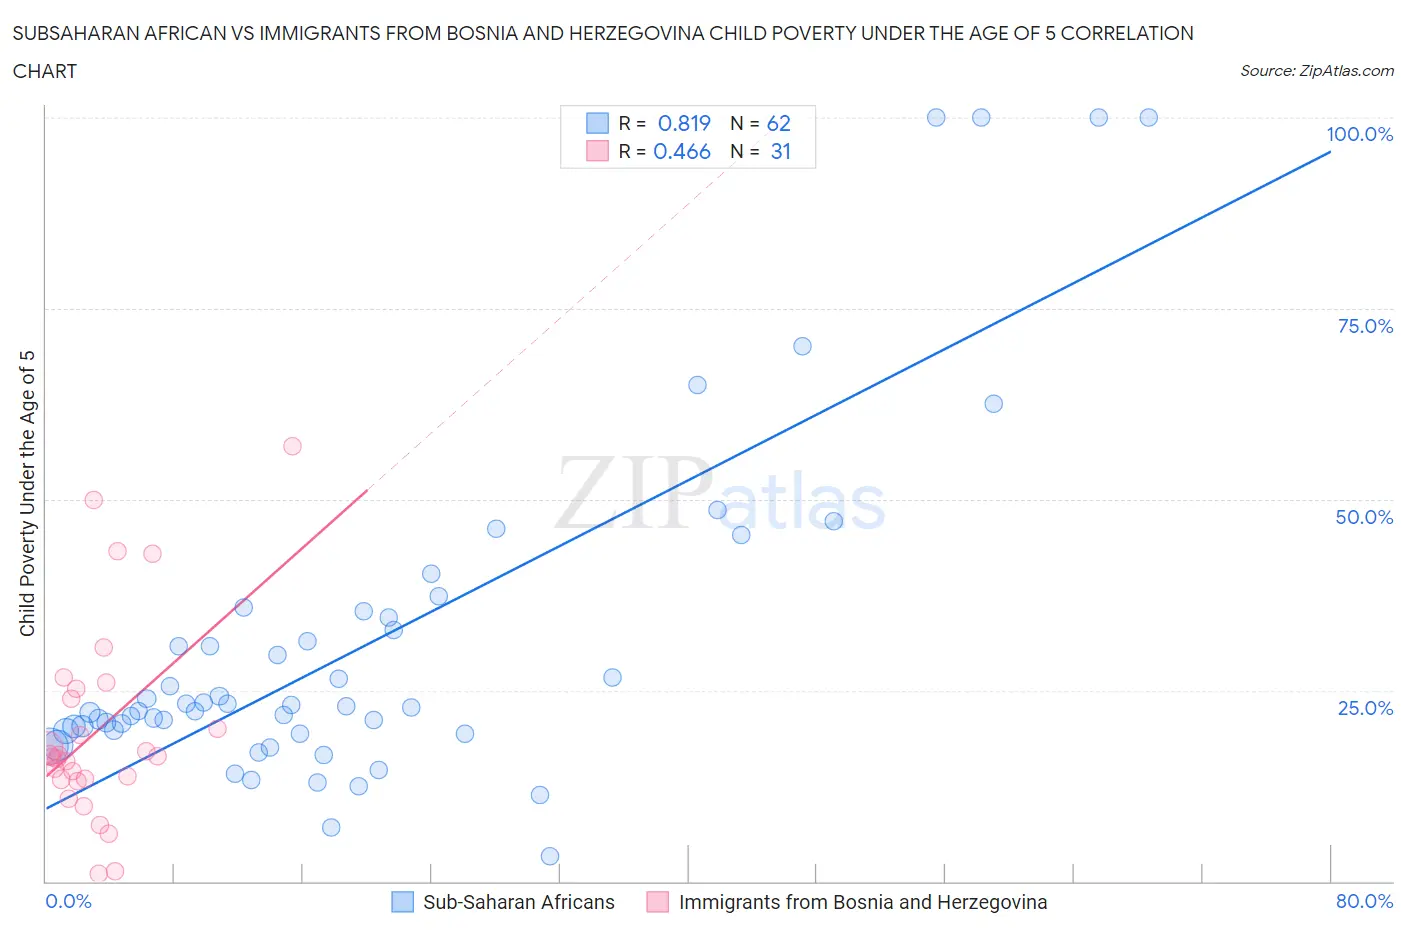 Subsaharan African vs Immigrants from Bosnia and Herzegovina Child Poverty Under the Age of 5